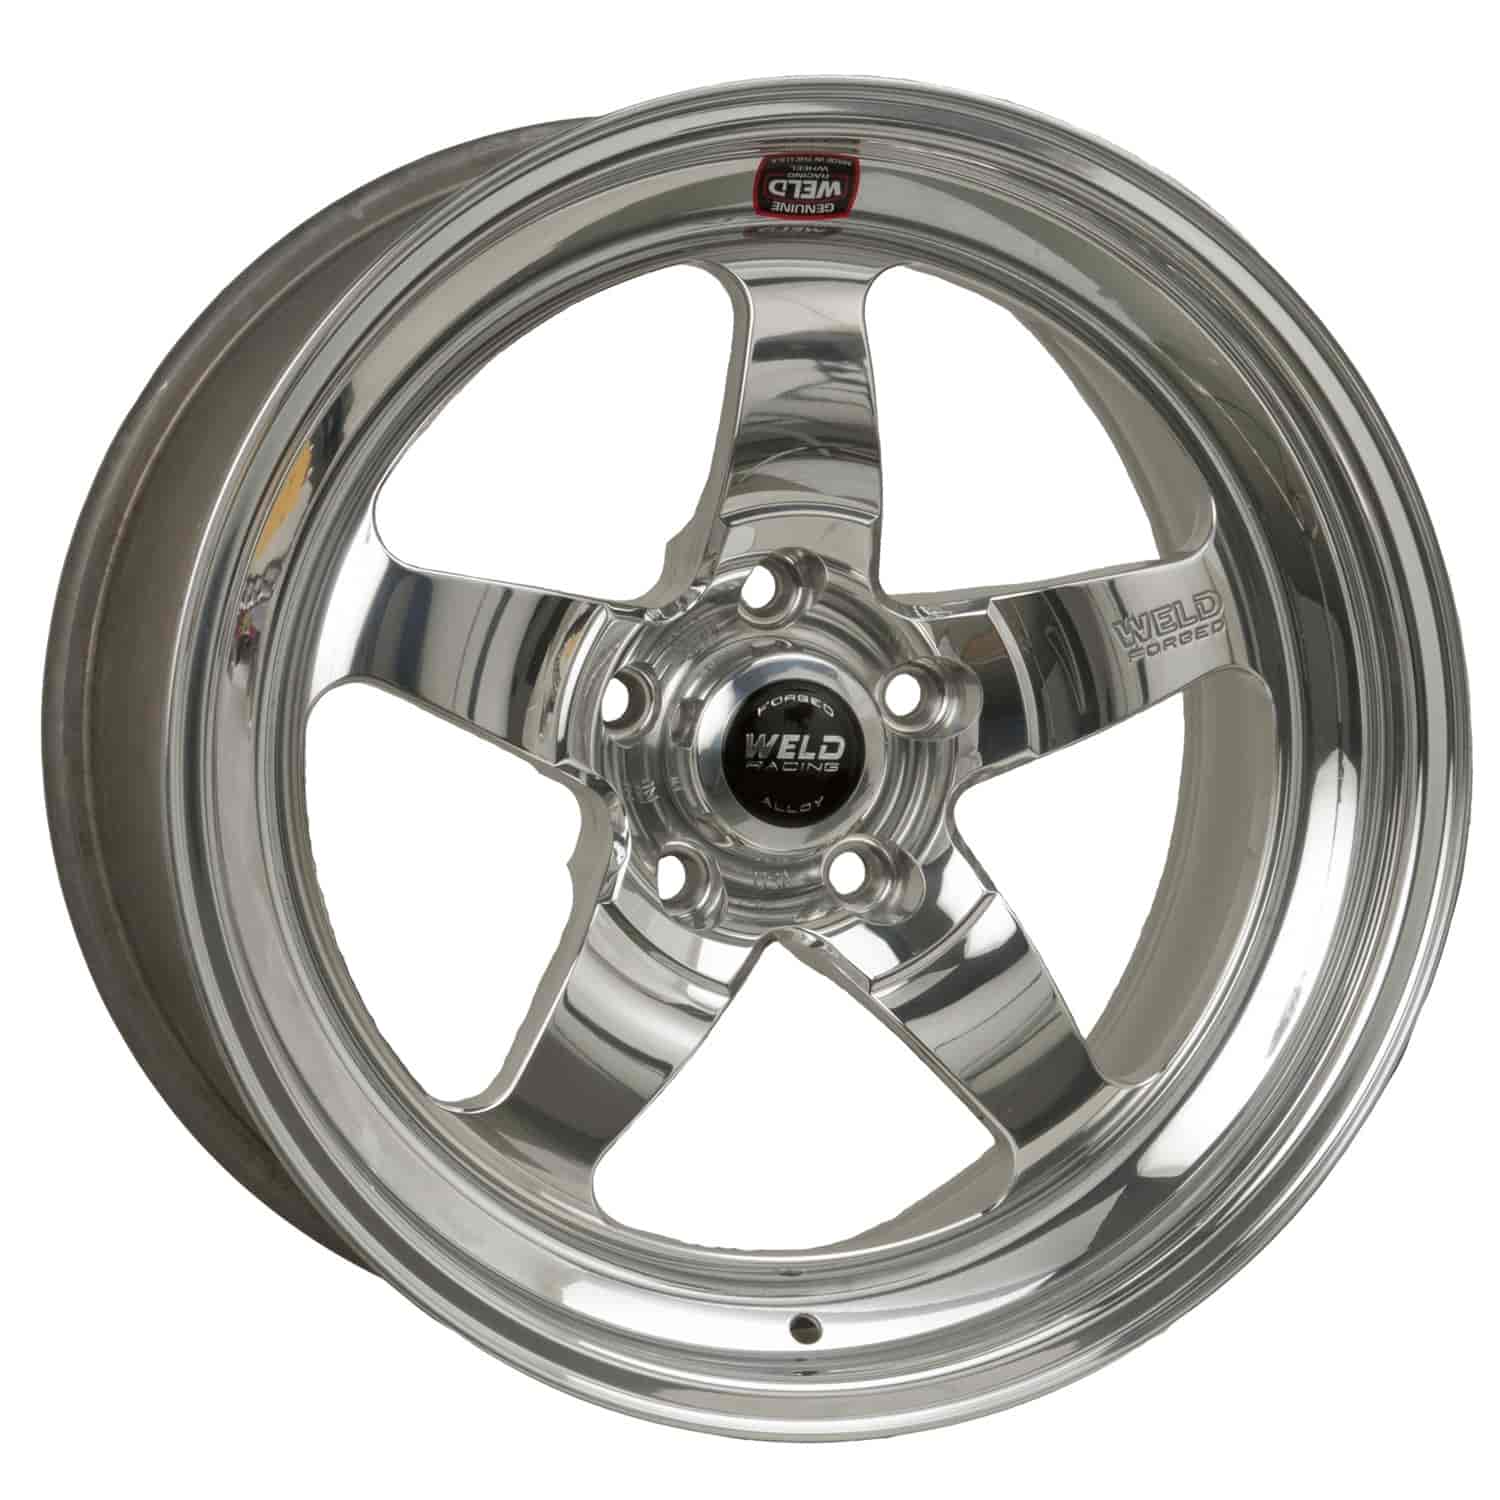 RT-S Series Wheel Size: 17" x 8" Bolt Circle: 5 x 4.5" Rear Spacing: 4.70" Polished